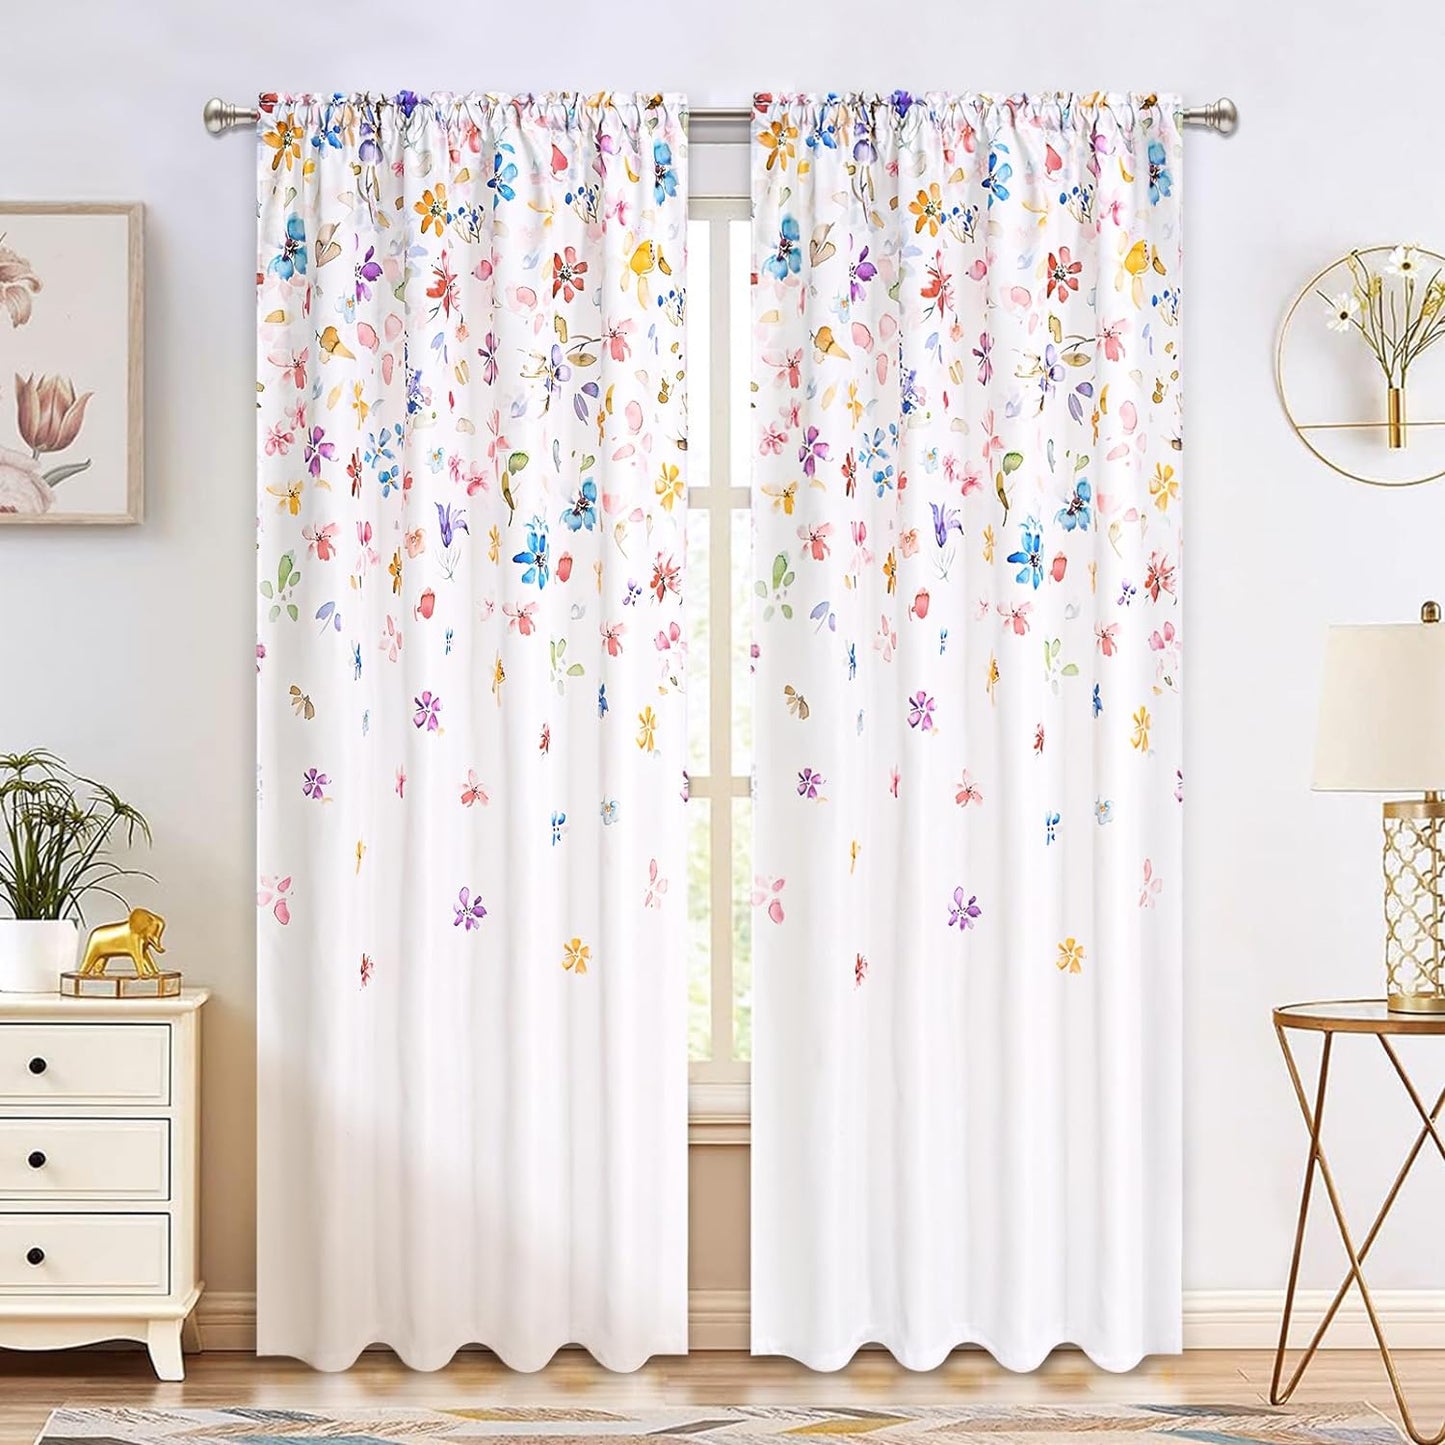 FRAMICS Floral Window Curtains for Living Room Floral Curtains 63 Inch Length 2 Panels Colorful Flowers Curtains for Bedroom Light Filtering Rod Pocket Curtains, 52" W X 63" L  FRAMICS White 52"W X 84"L 